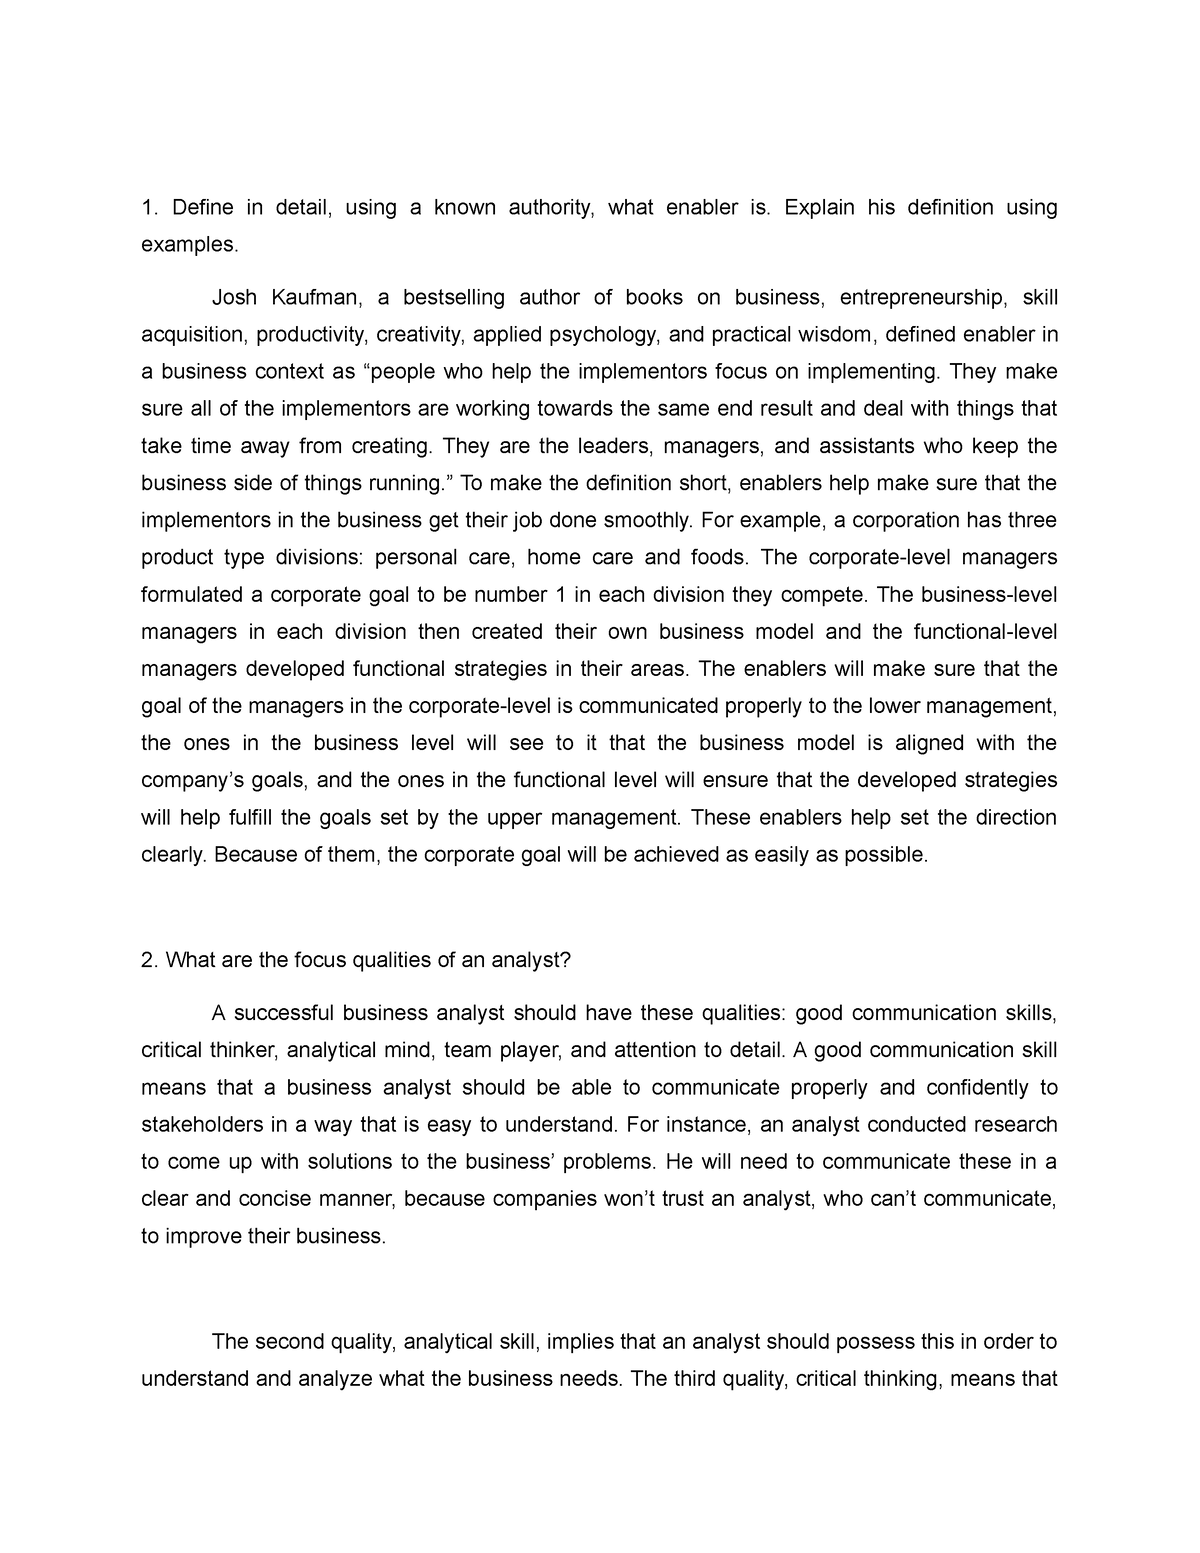 example of business analysis essay